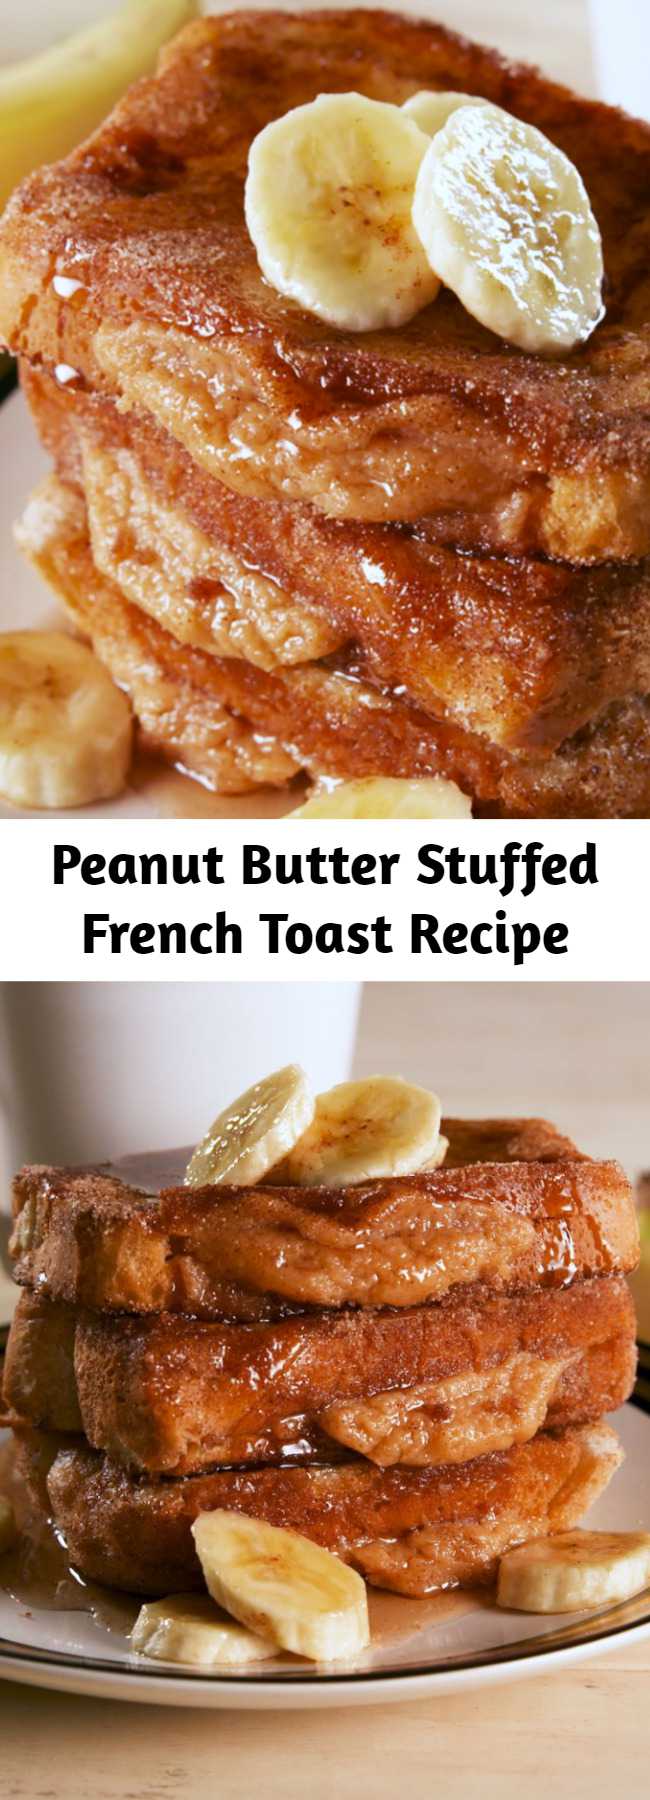 Peanut Butter Stuffed French Toast Recipe - Get out of town. #easyrecipe #breakfast #brunch #peanutbutter #food